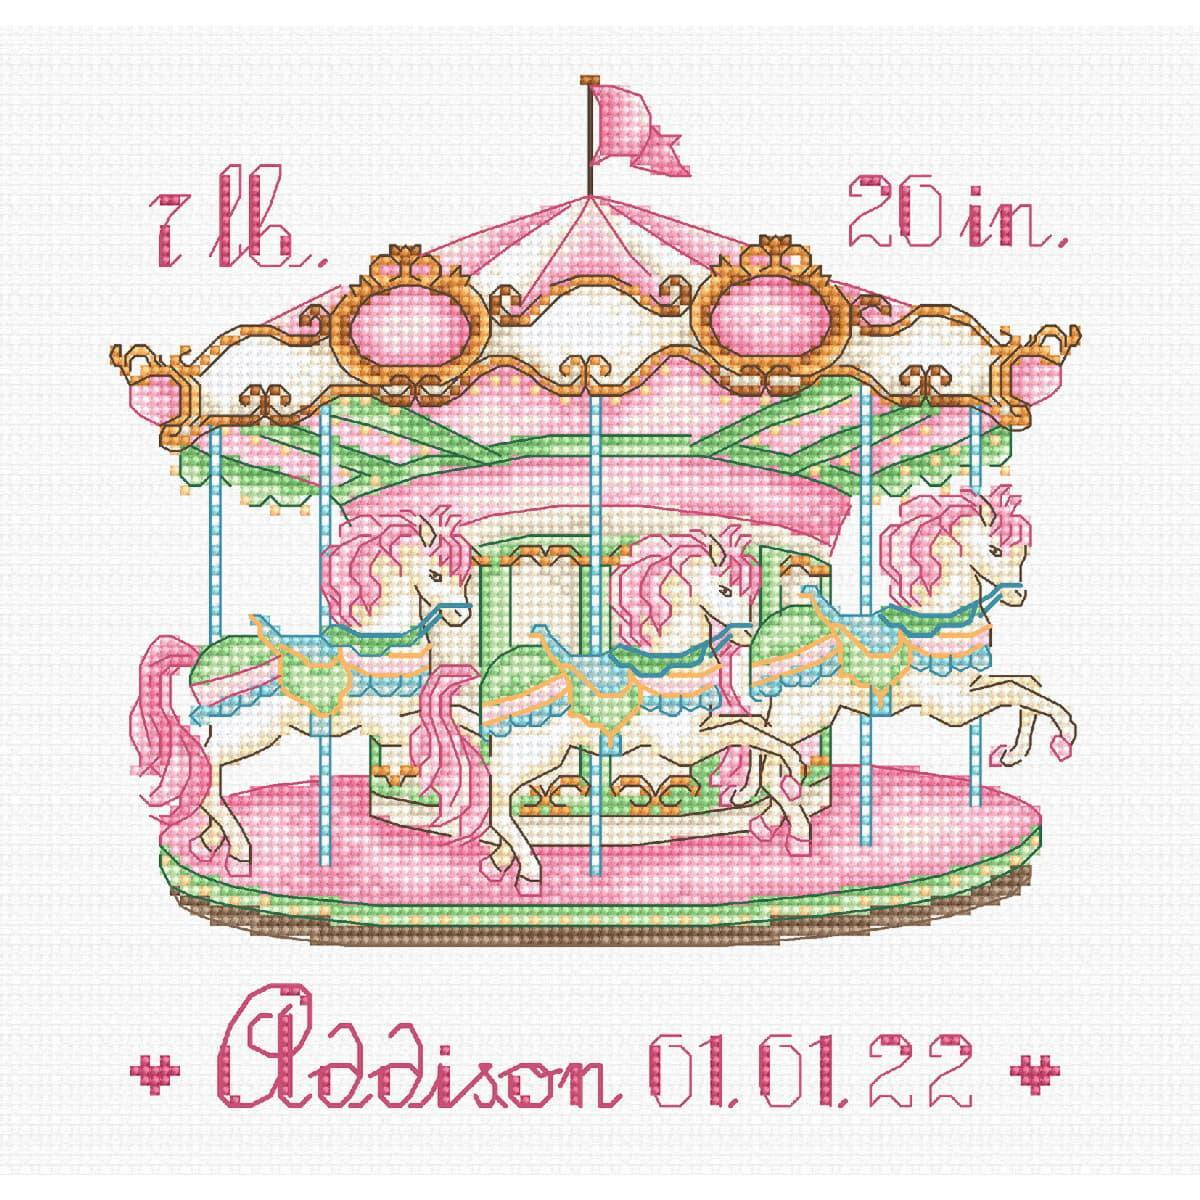 A colorful cross stitch design shows a pink carousel with...